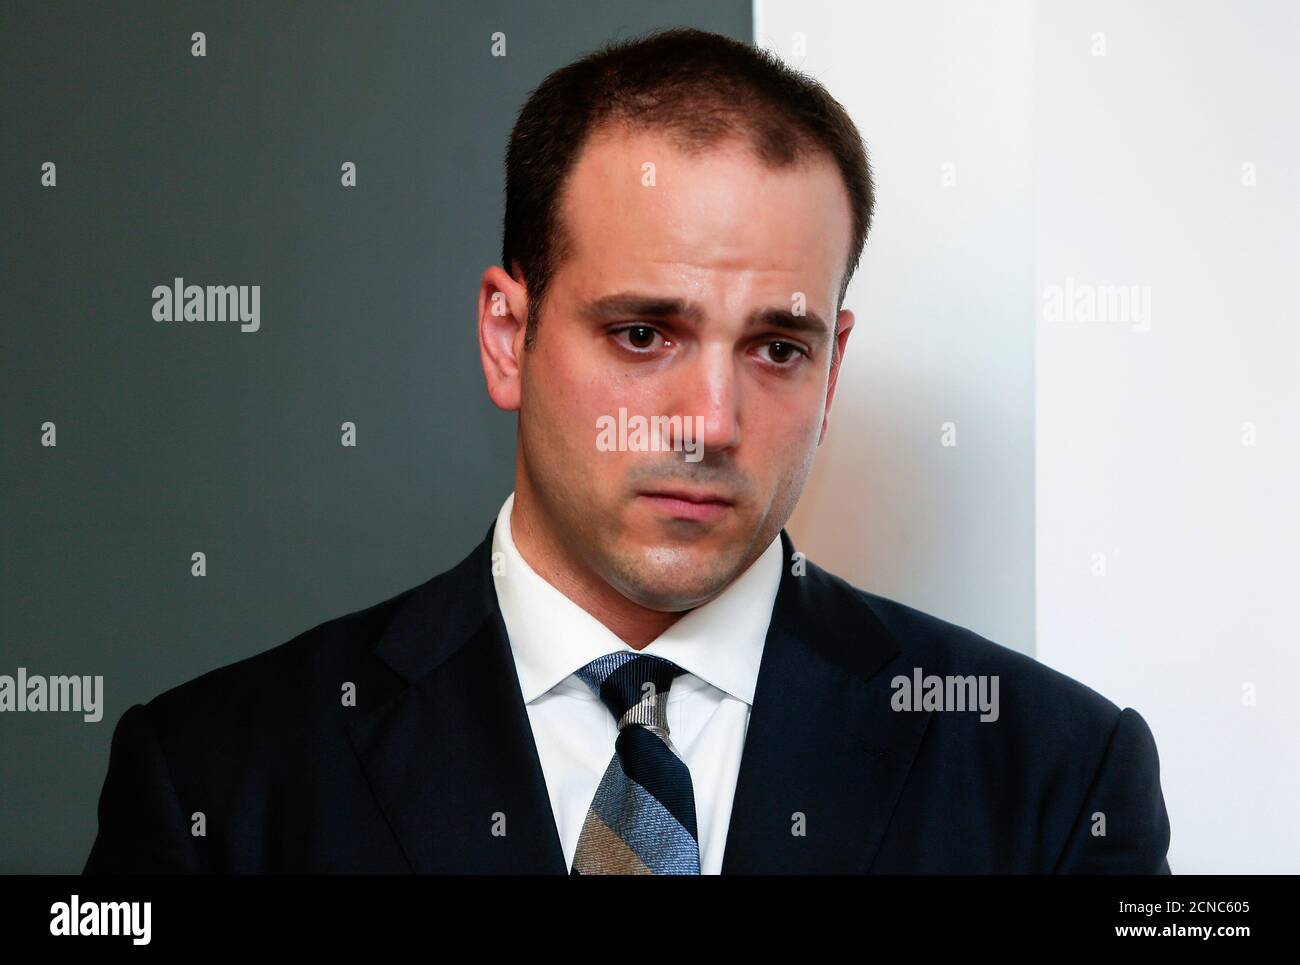 Michael Kobold, spokesperson of Gandolfini family, looks down during a news conference about James Gandolfini's death in Rome June 20, 2013. Gandolfini, the burly actor best known for his Emmy-winning portrayal of a conflicted New Jersey mob boss in the groundbreaking TV series 'The Sopranos,' died on Wednesday vacationing in Italy. He was 51. REUTERS/Yara Nardi (ITALY - Tags: OBITUARY ENTERTAINMENT) Stock Photo